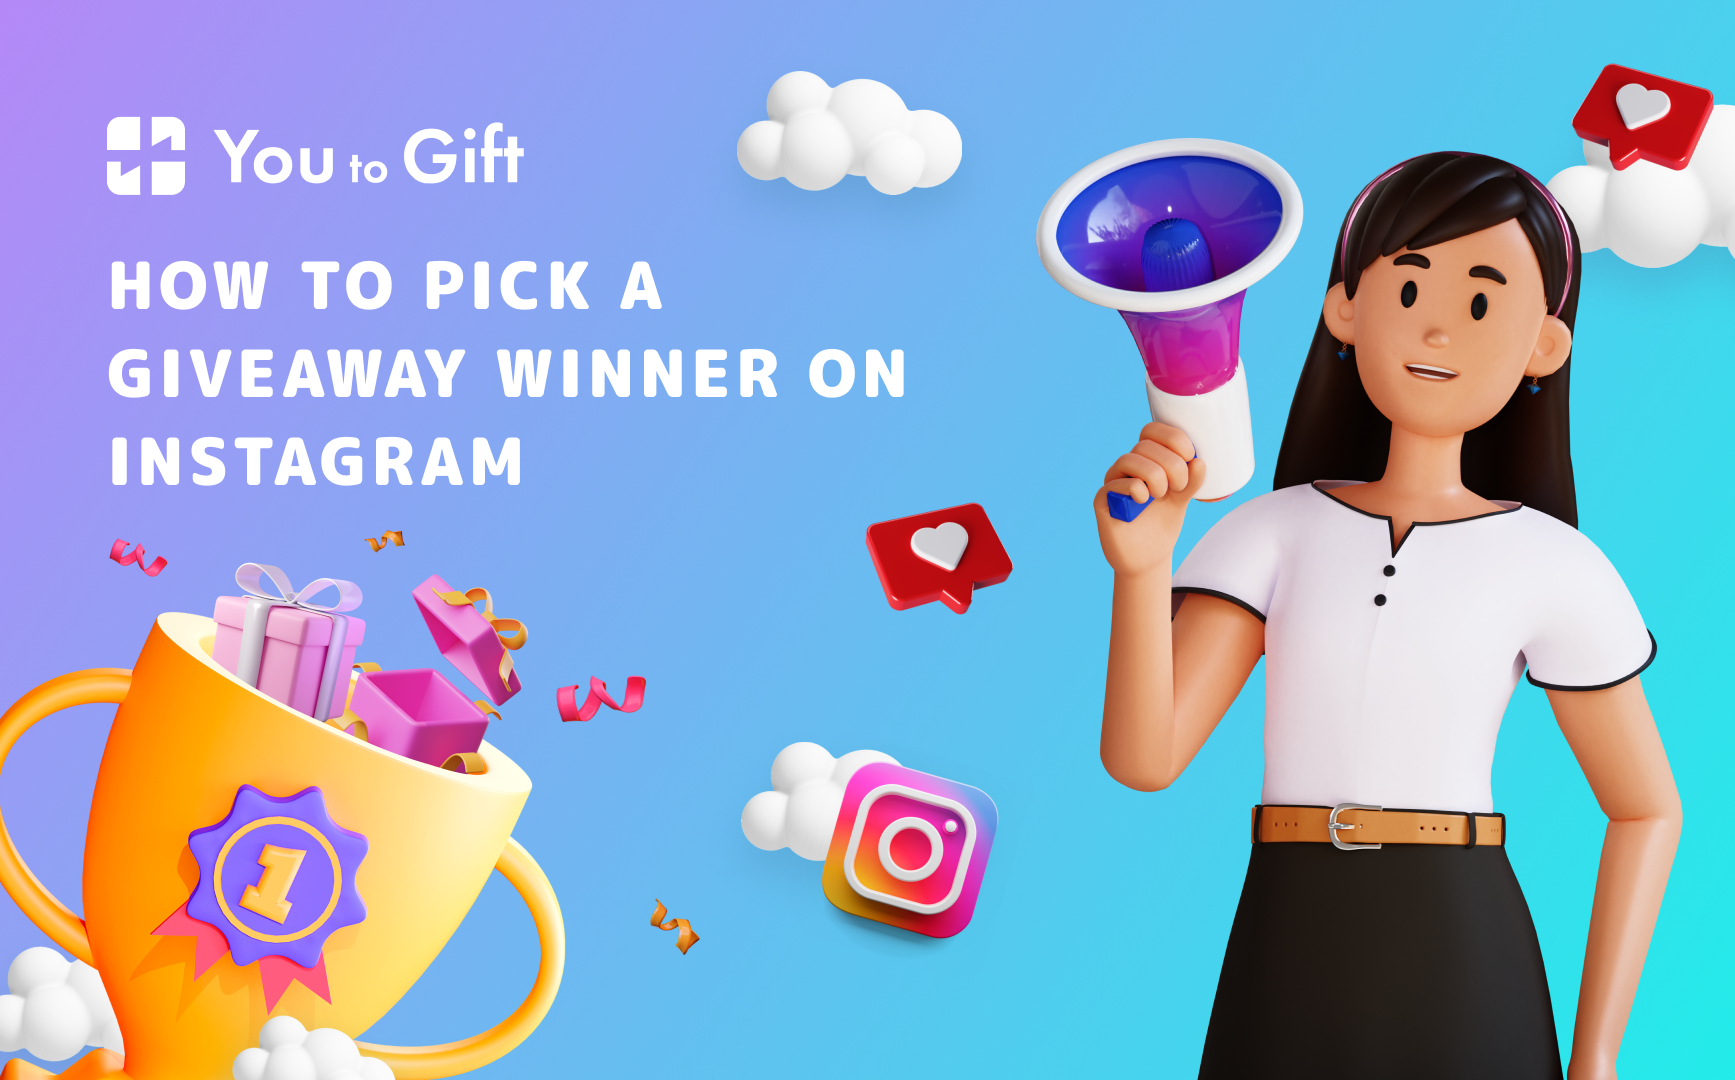 How to Pick a Giveaway Winner on Instagram